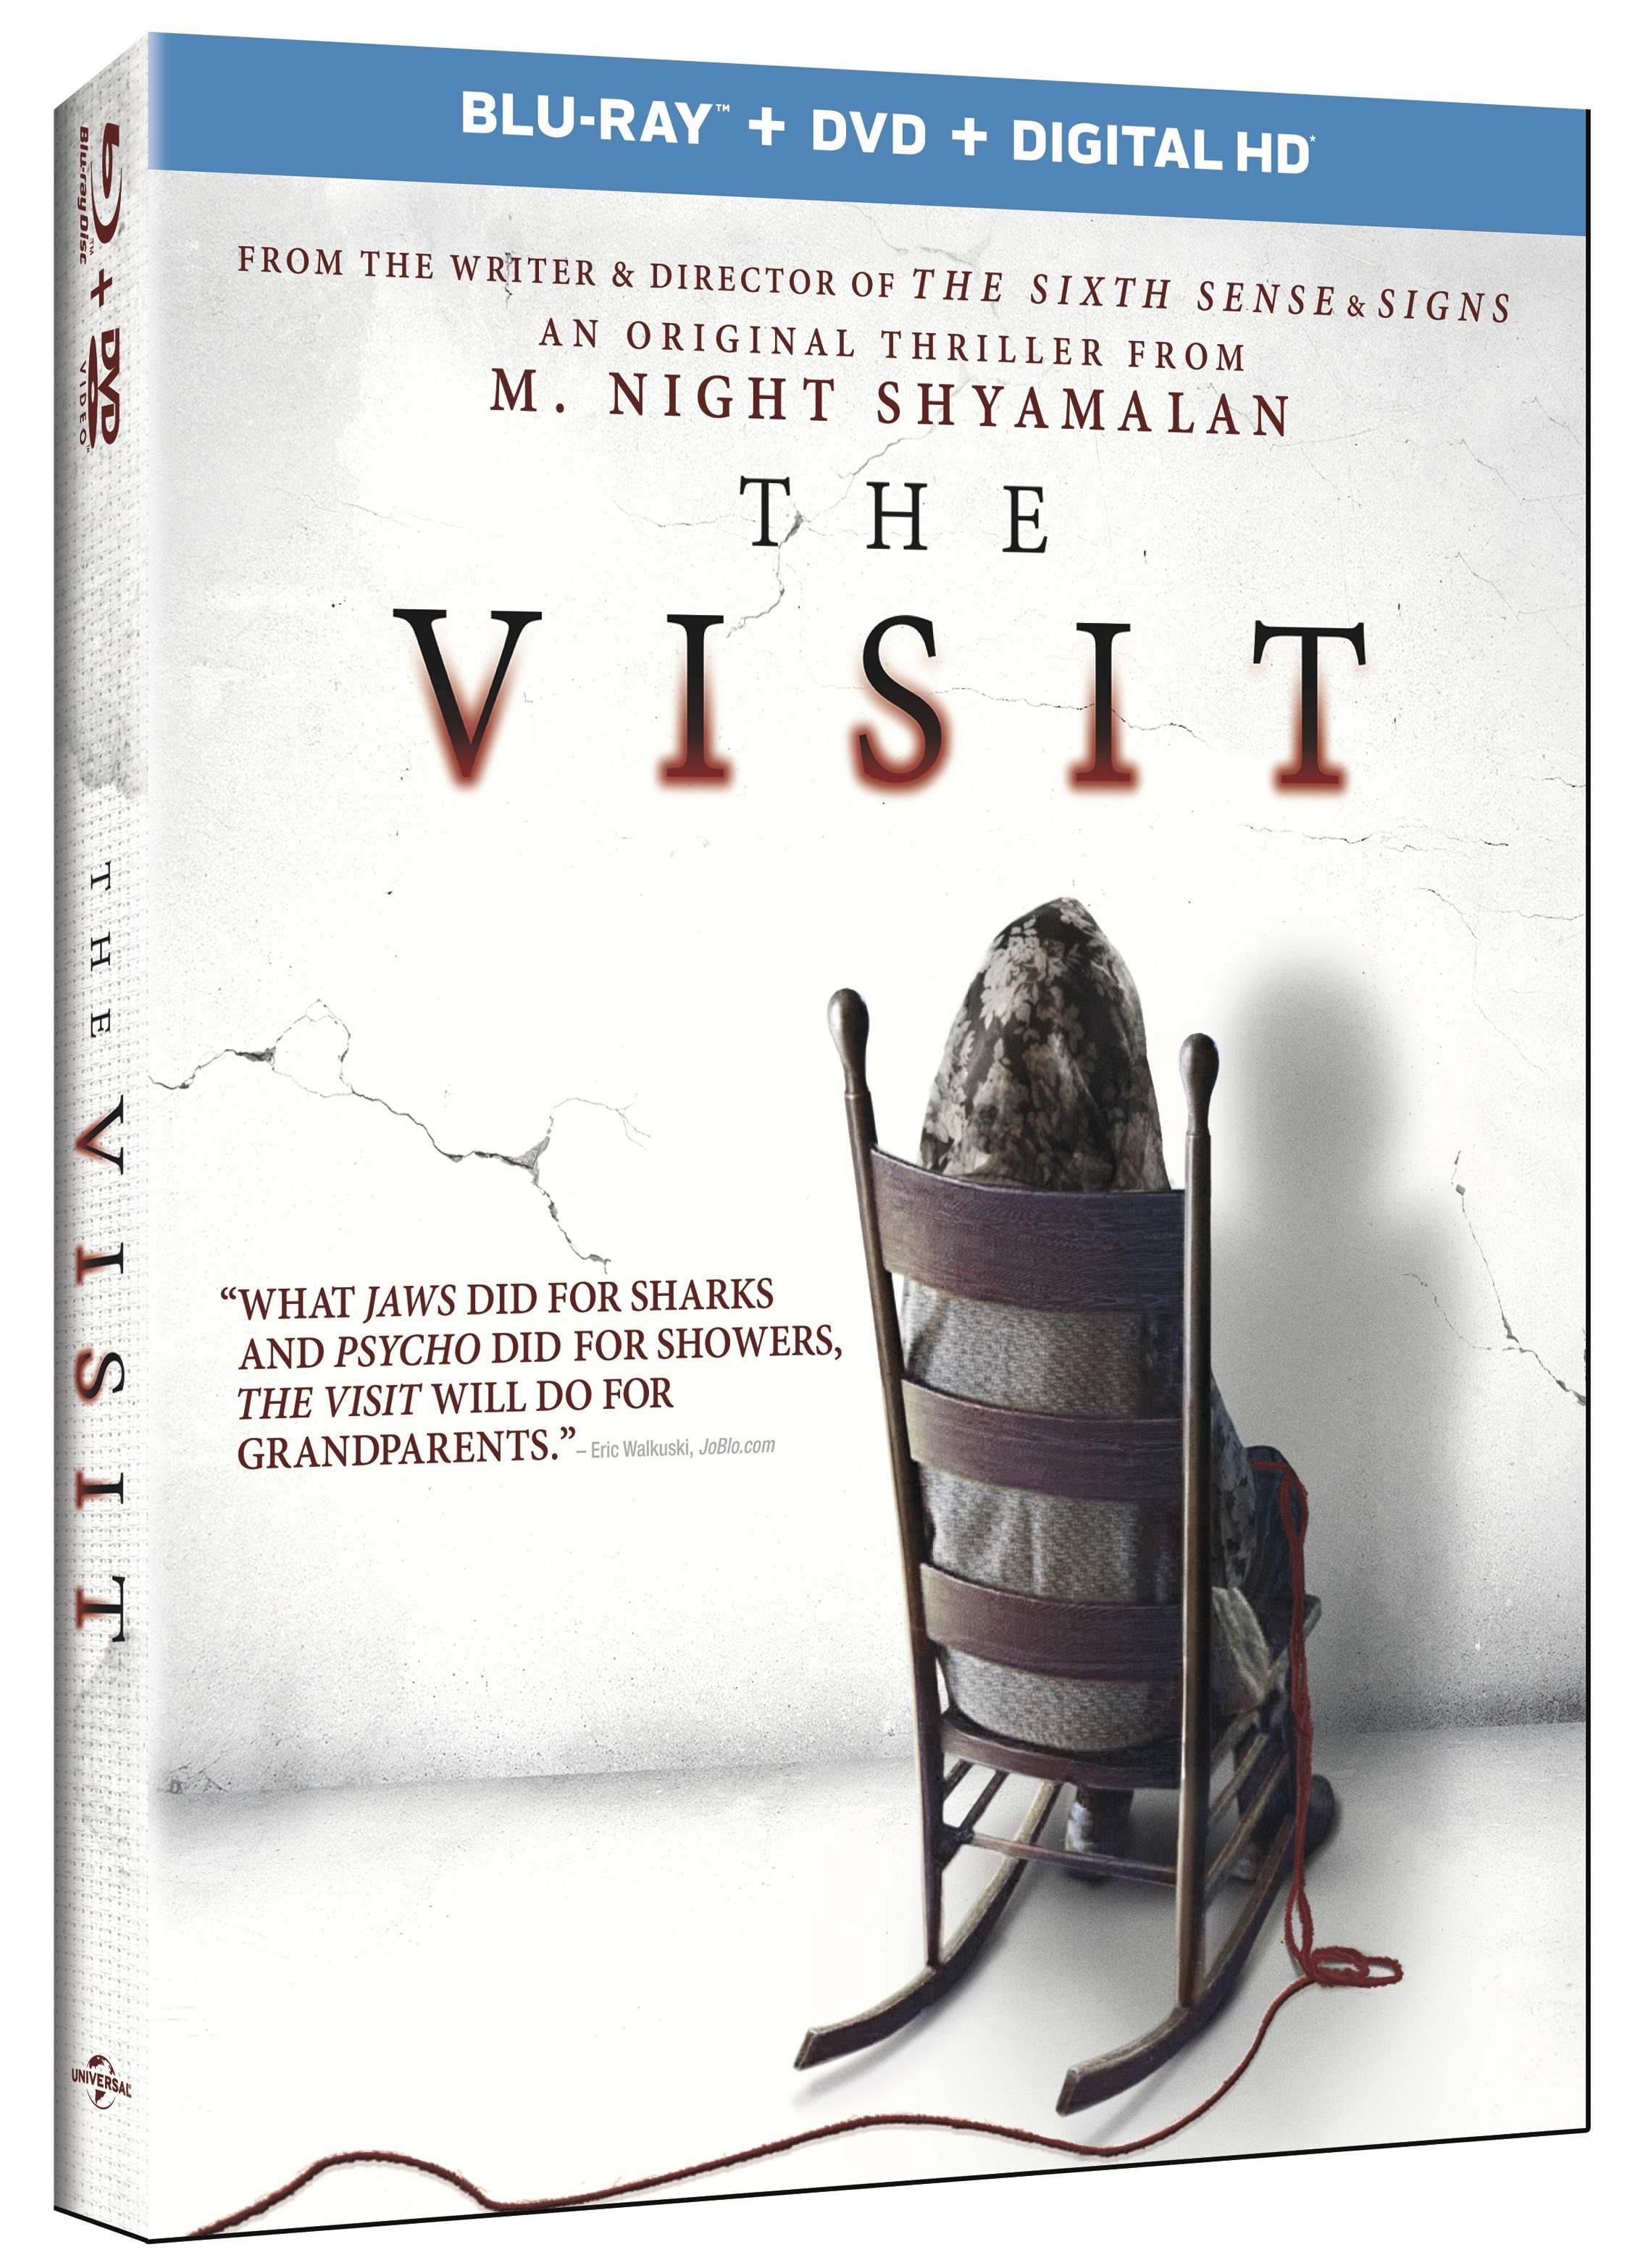 Blu Ray copy of M. Night Shymalan's The Visit for giveaway